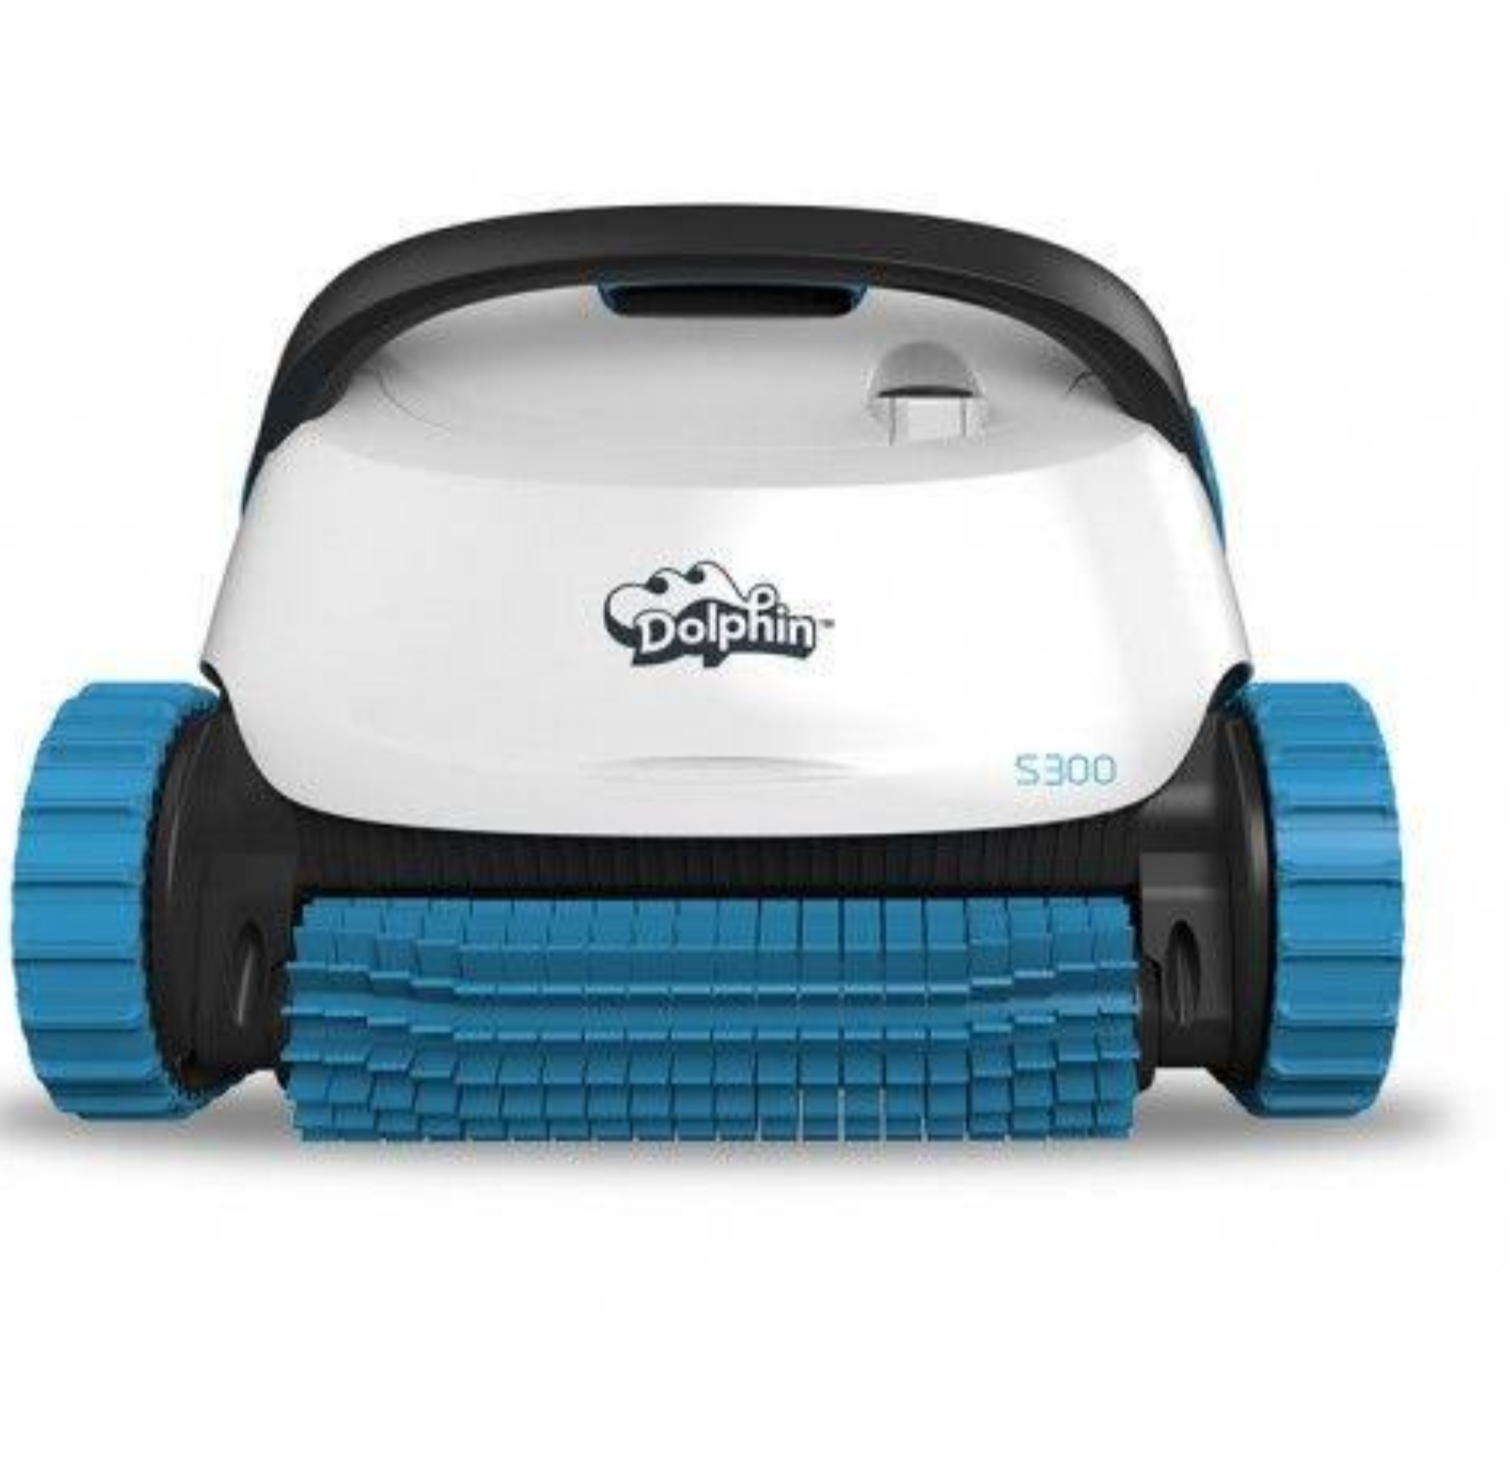 dolphin-robotic-pool-cleaner-s300